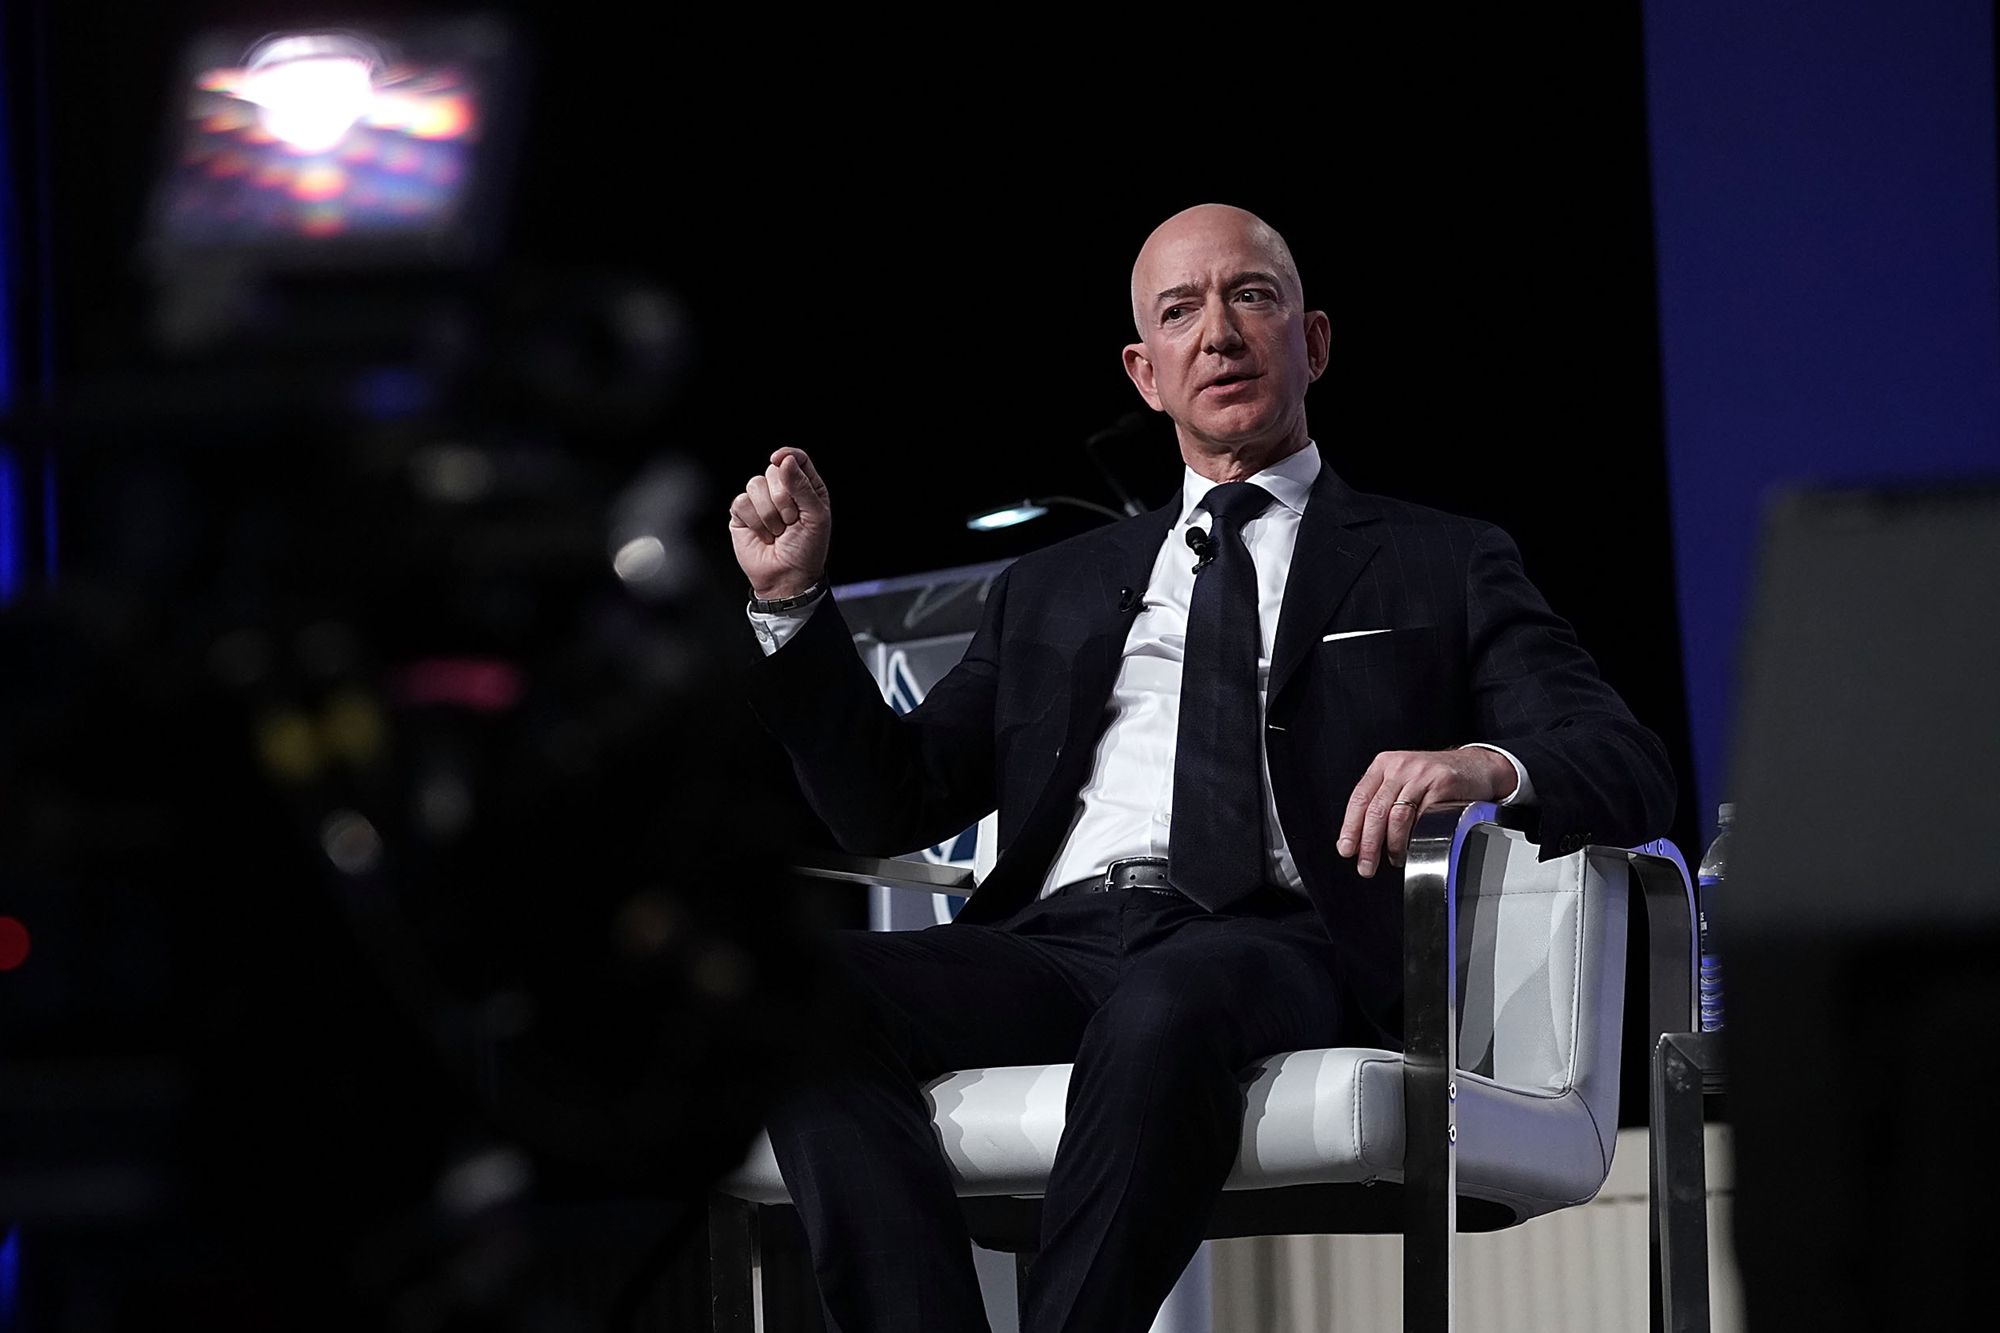 That Time Jeff Bezos Was the Stupidest Person in the Room